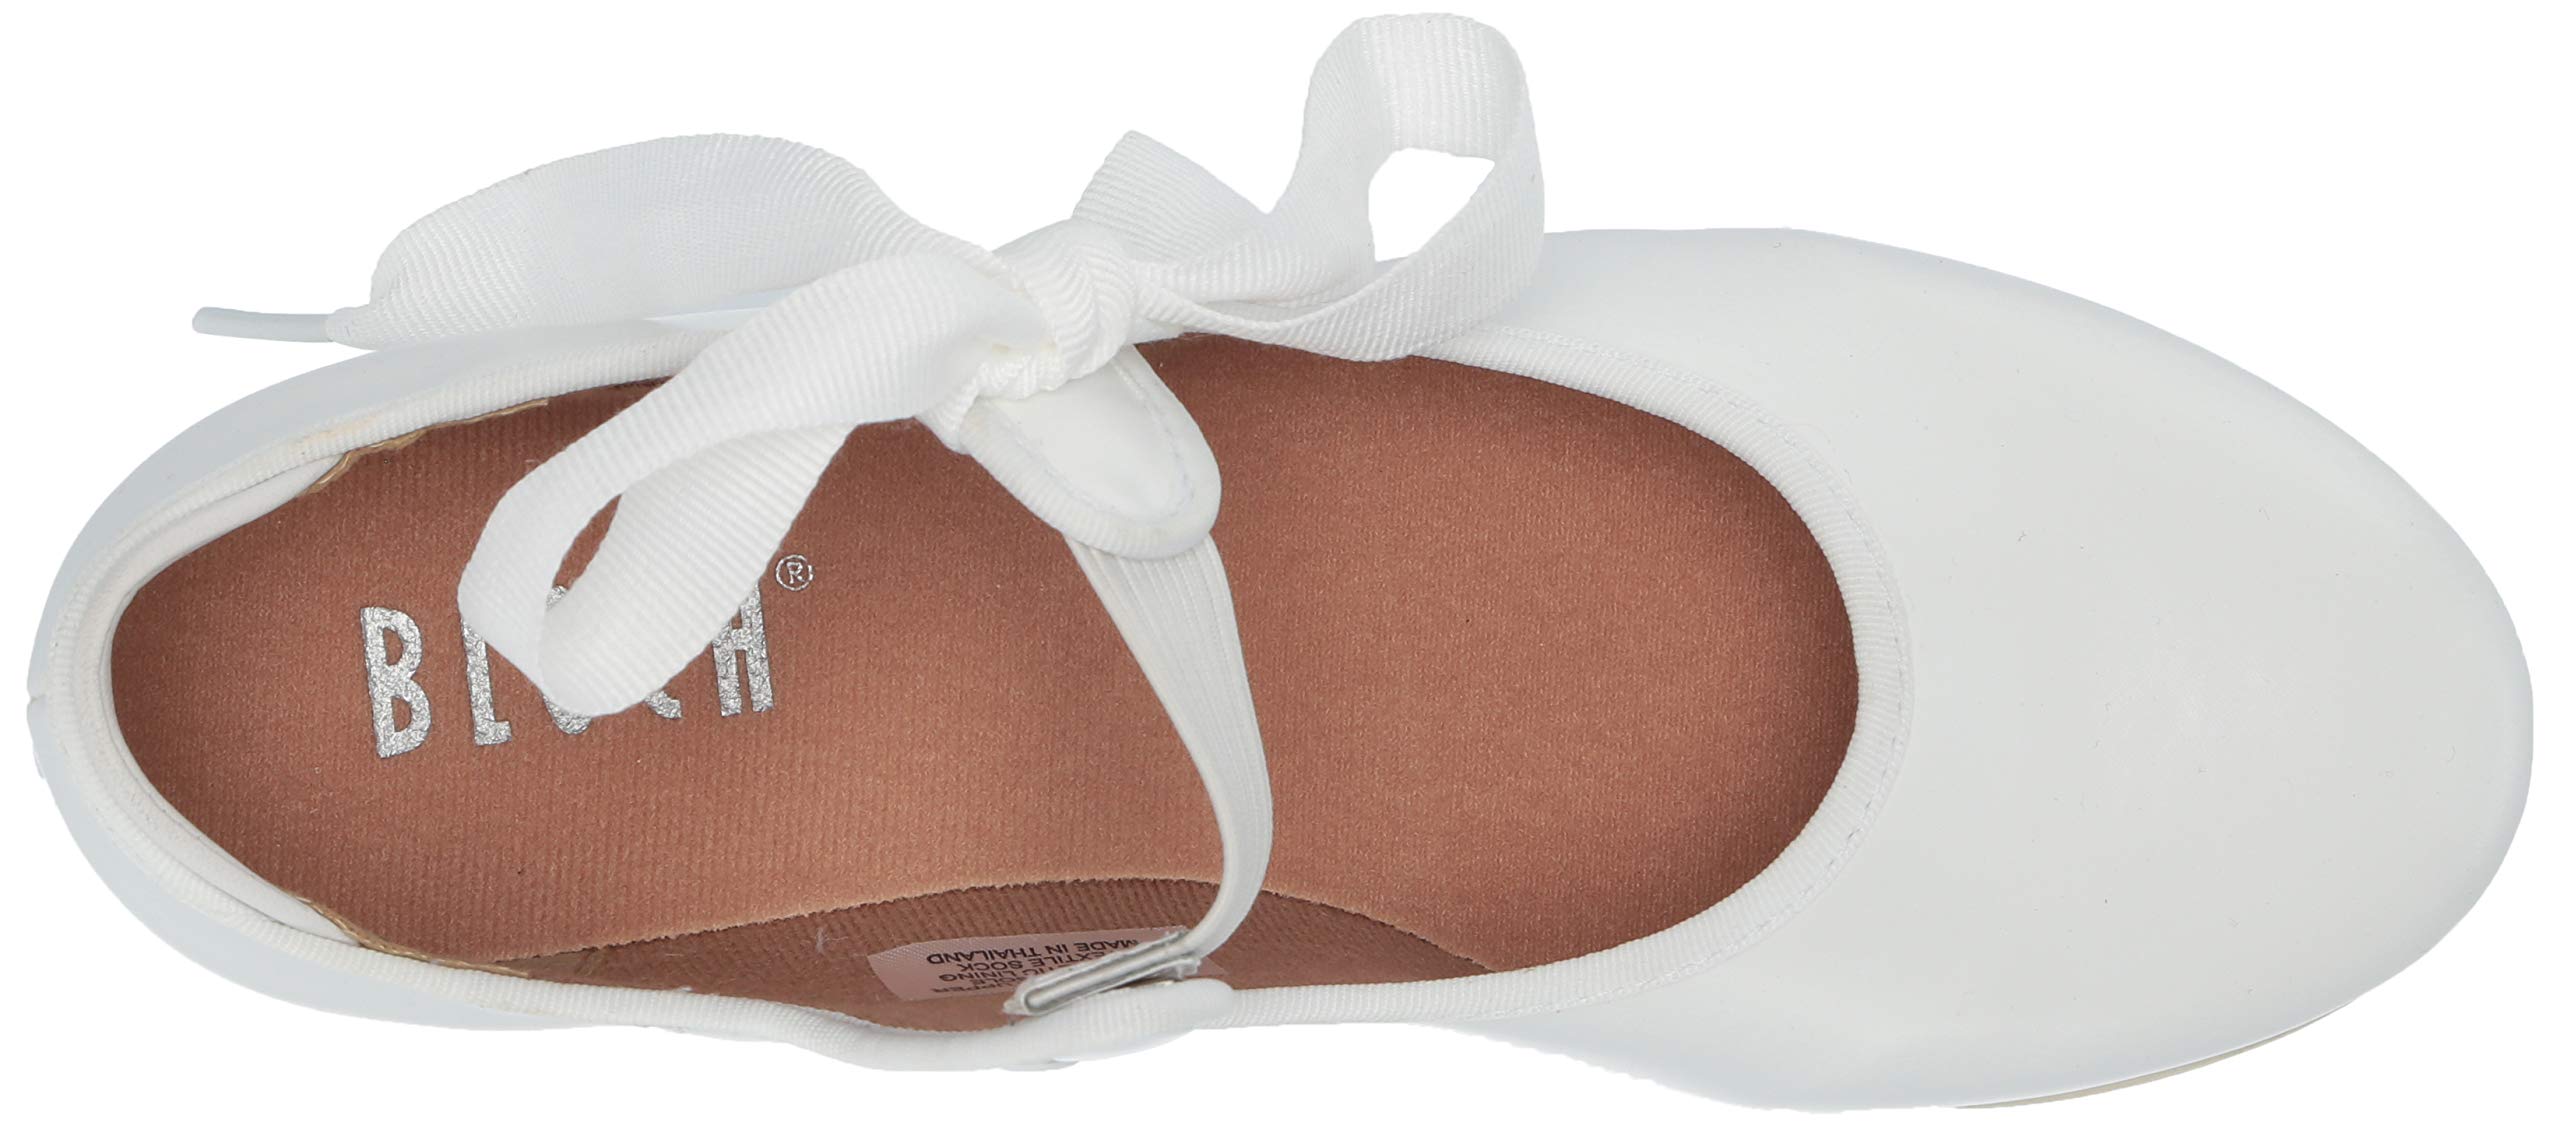 Bloch Girl's Annie Tyette Dance Shoe, Elastic Strap with Grosgrain Ribbon, Cushioned Insole, Non-Slip Sole, Techno Tap Plates Attached, Comfortable, High Durability, Superior Fit